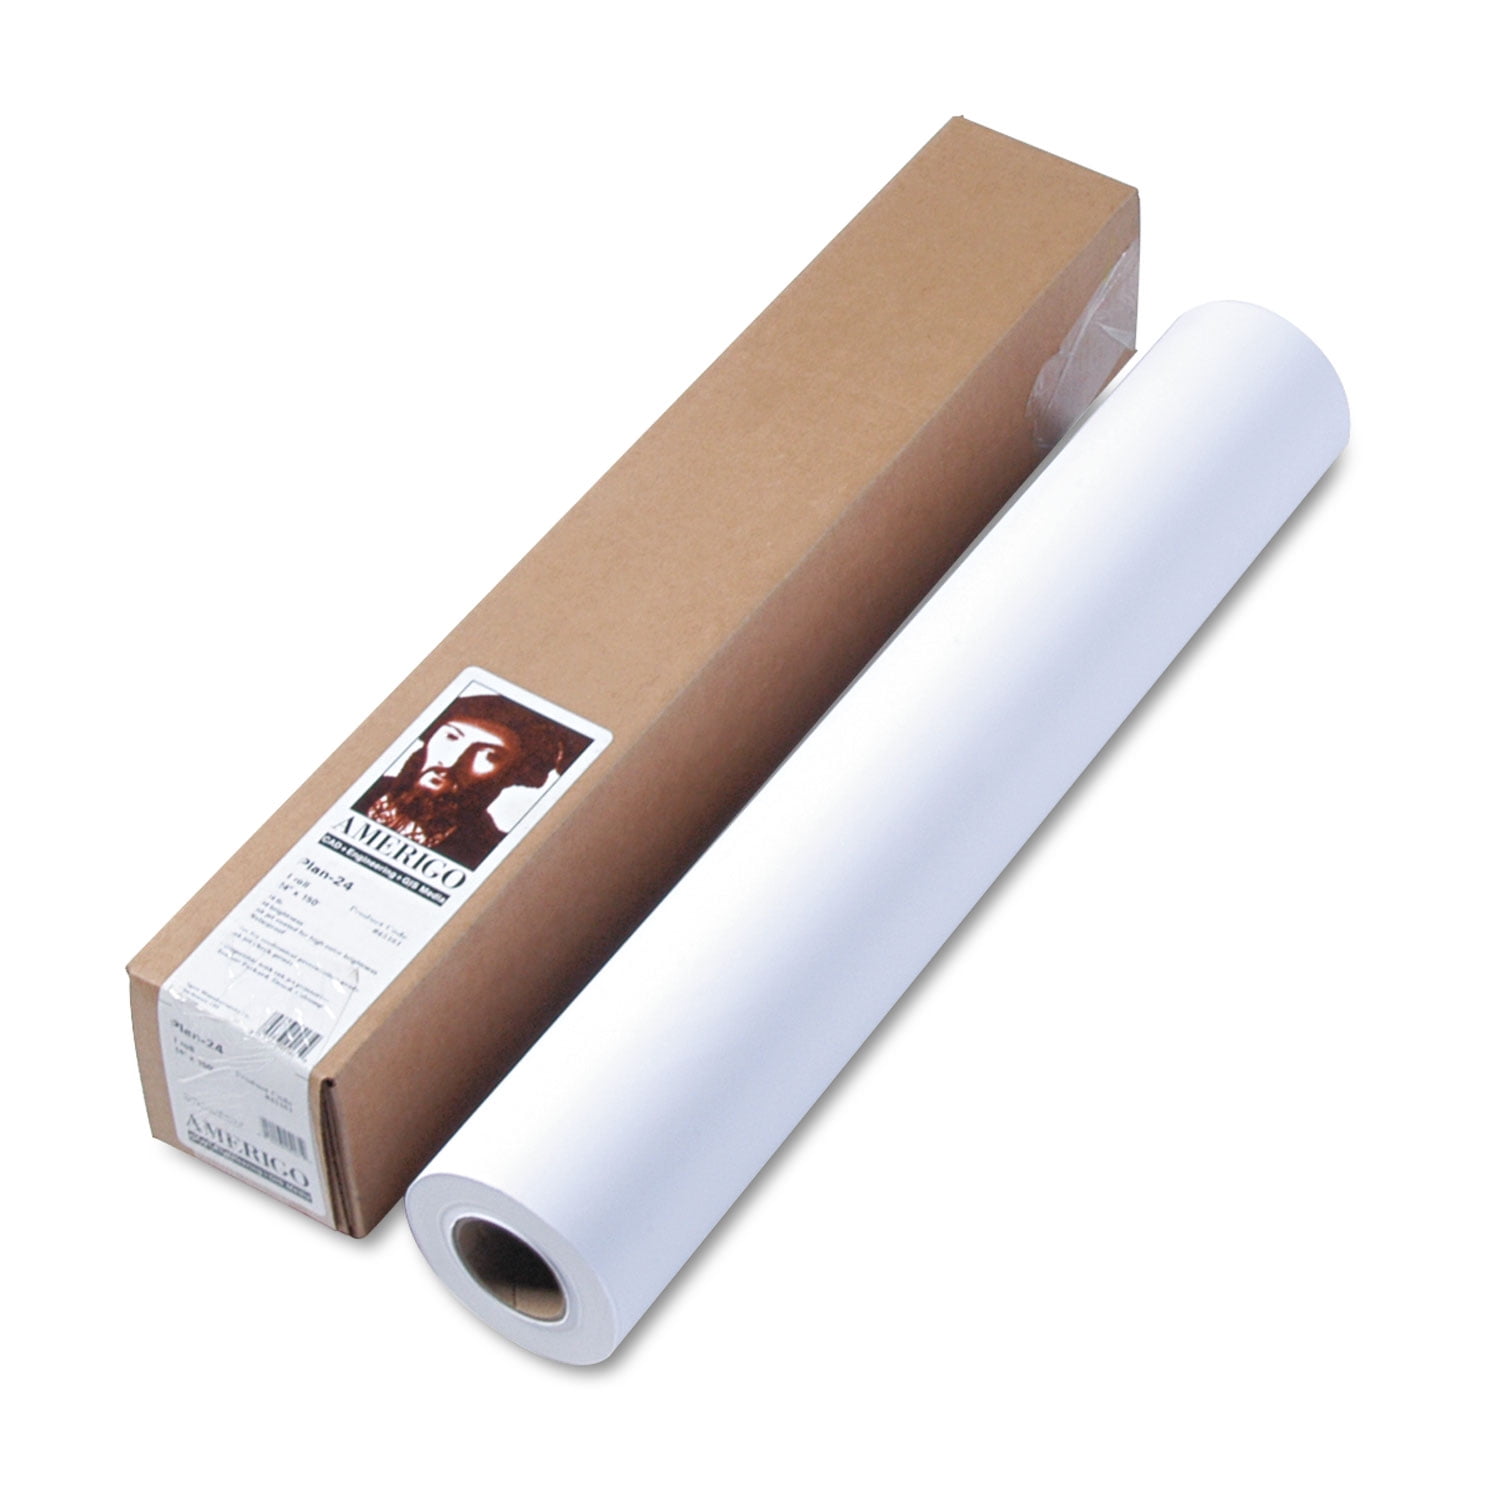 A1-24 x 150 ft For Inkjet Print 90 Brightness HP Coated Paper 1 / Roll Bright White 26 lb